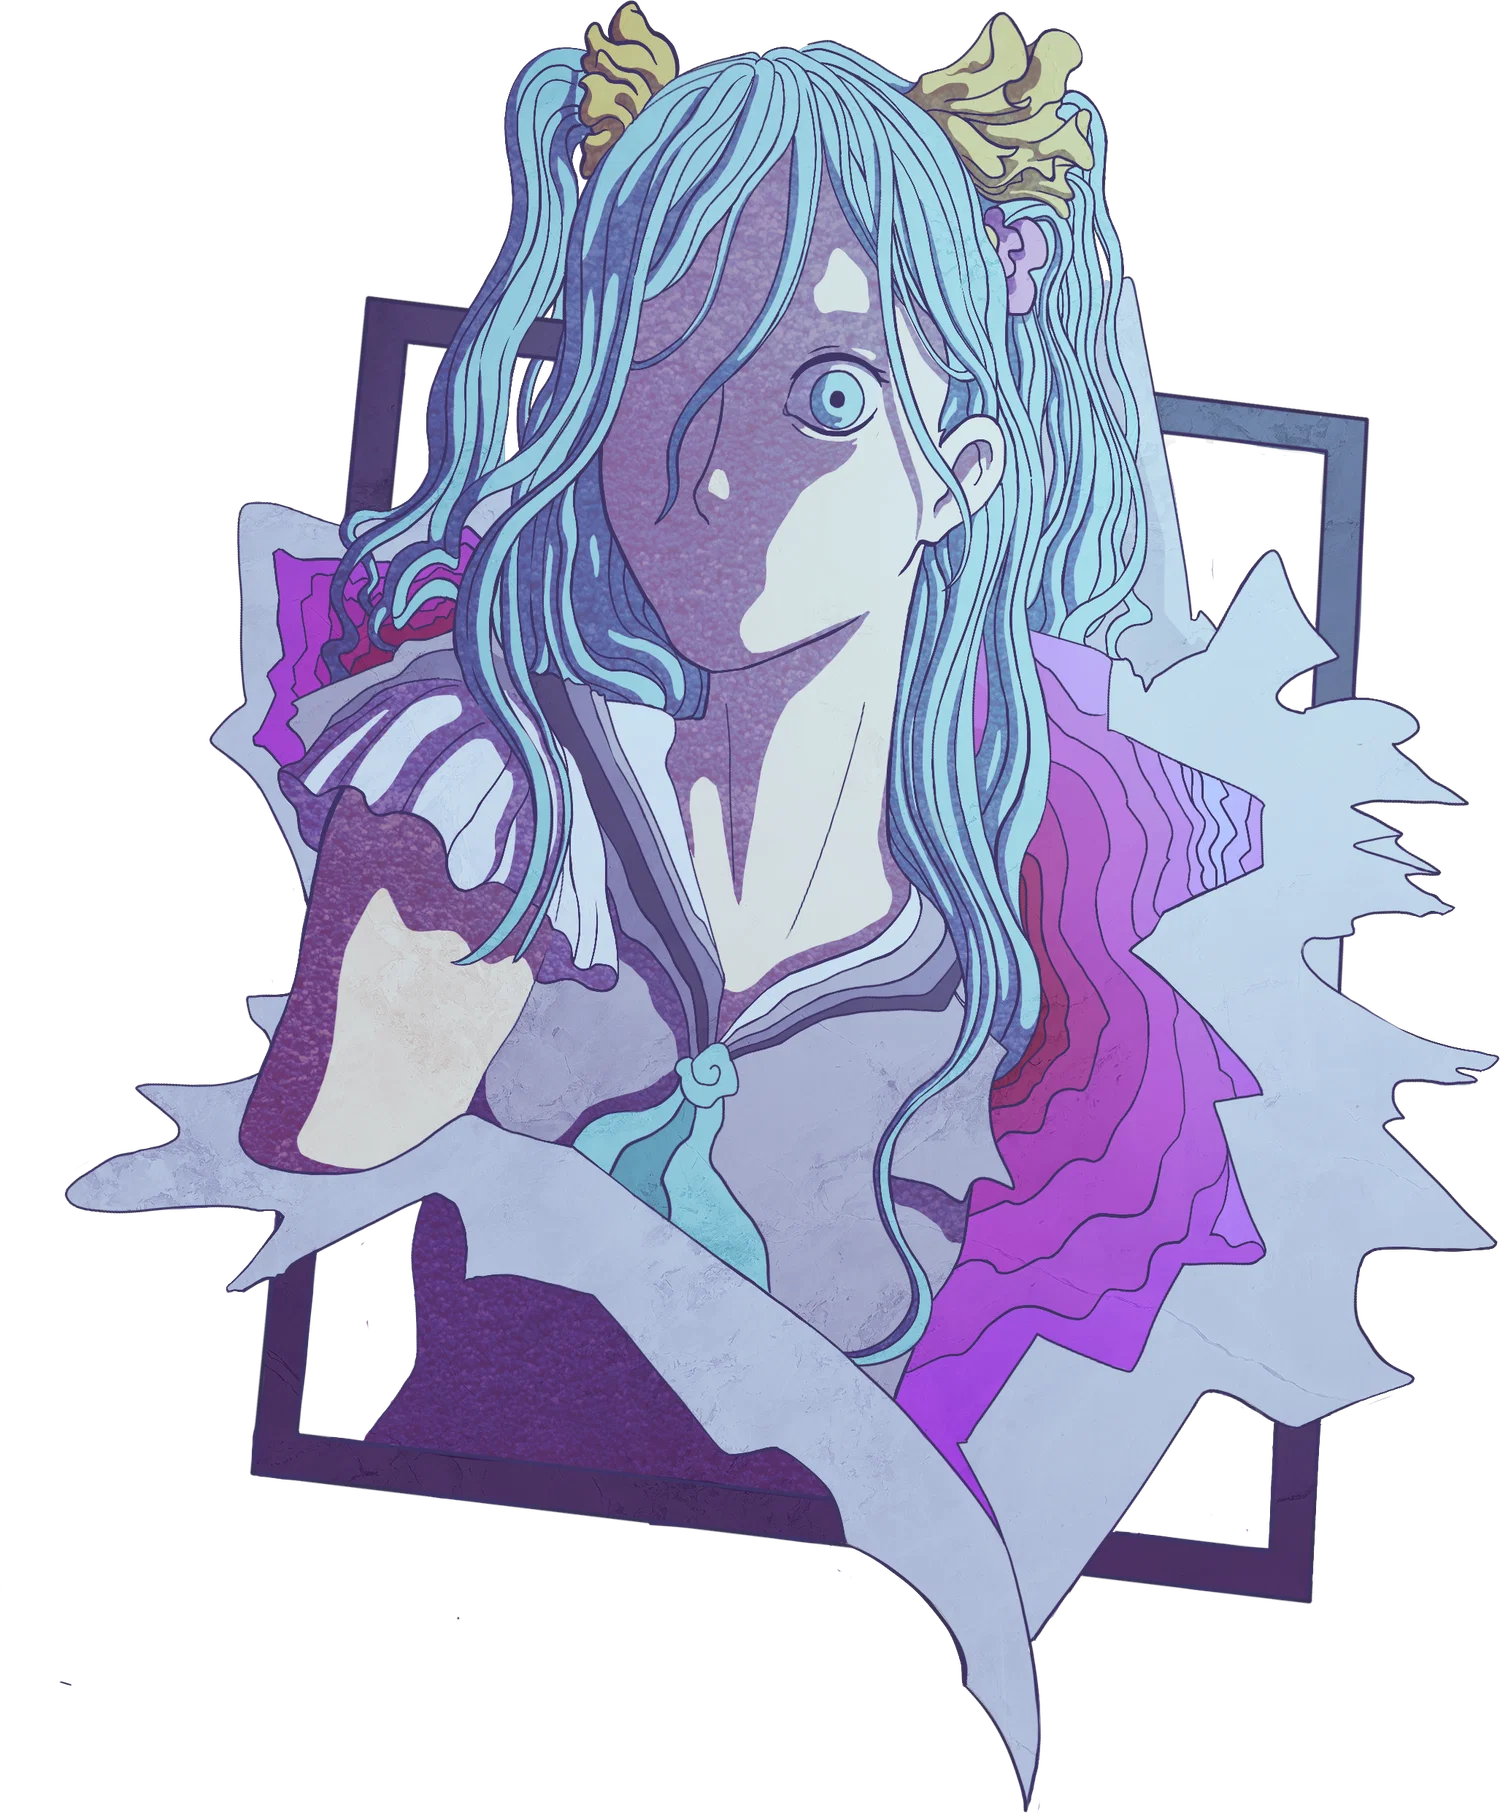 Digital portrait of a character in a transparent picture frame. She has blue hair and is surrounded by an effect like a cracked geode with jagged edges. Half her face is covered in shadow, so it appears as though she has no mouth or eyebrows.